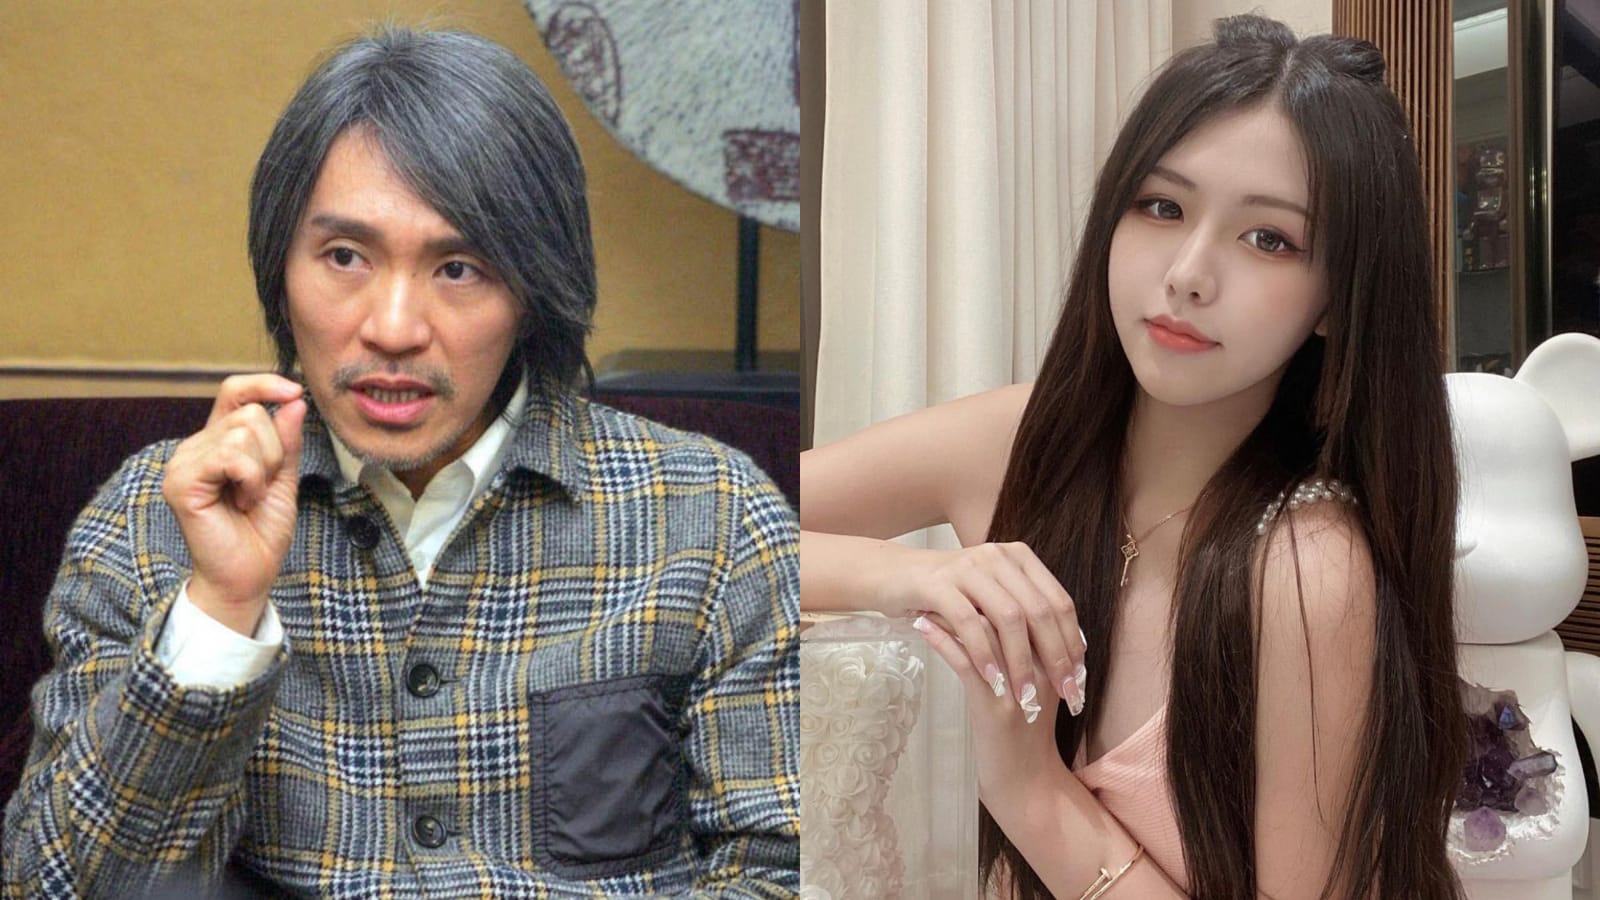 Stephen Chow, 59, Denies He Is Dating 17-Year-Old Failed Miss Hong Kong Contestant After They Were Seen Going On A Yacht Trip Together